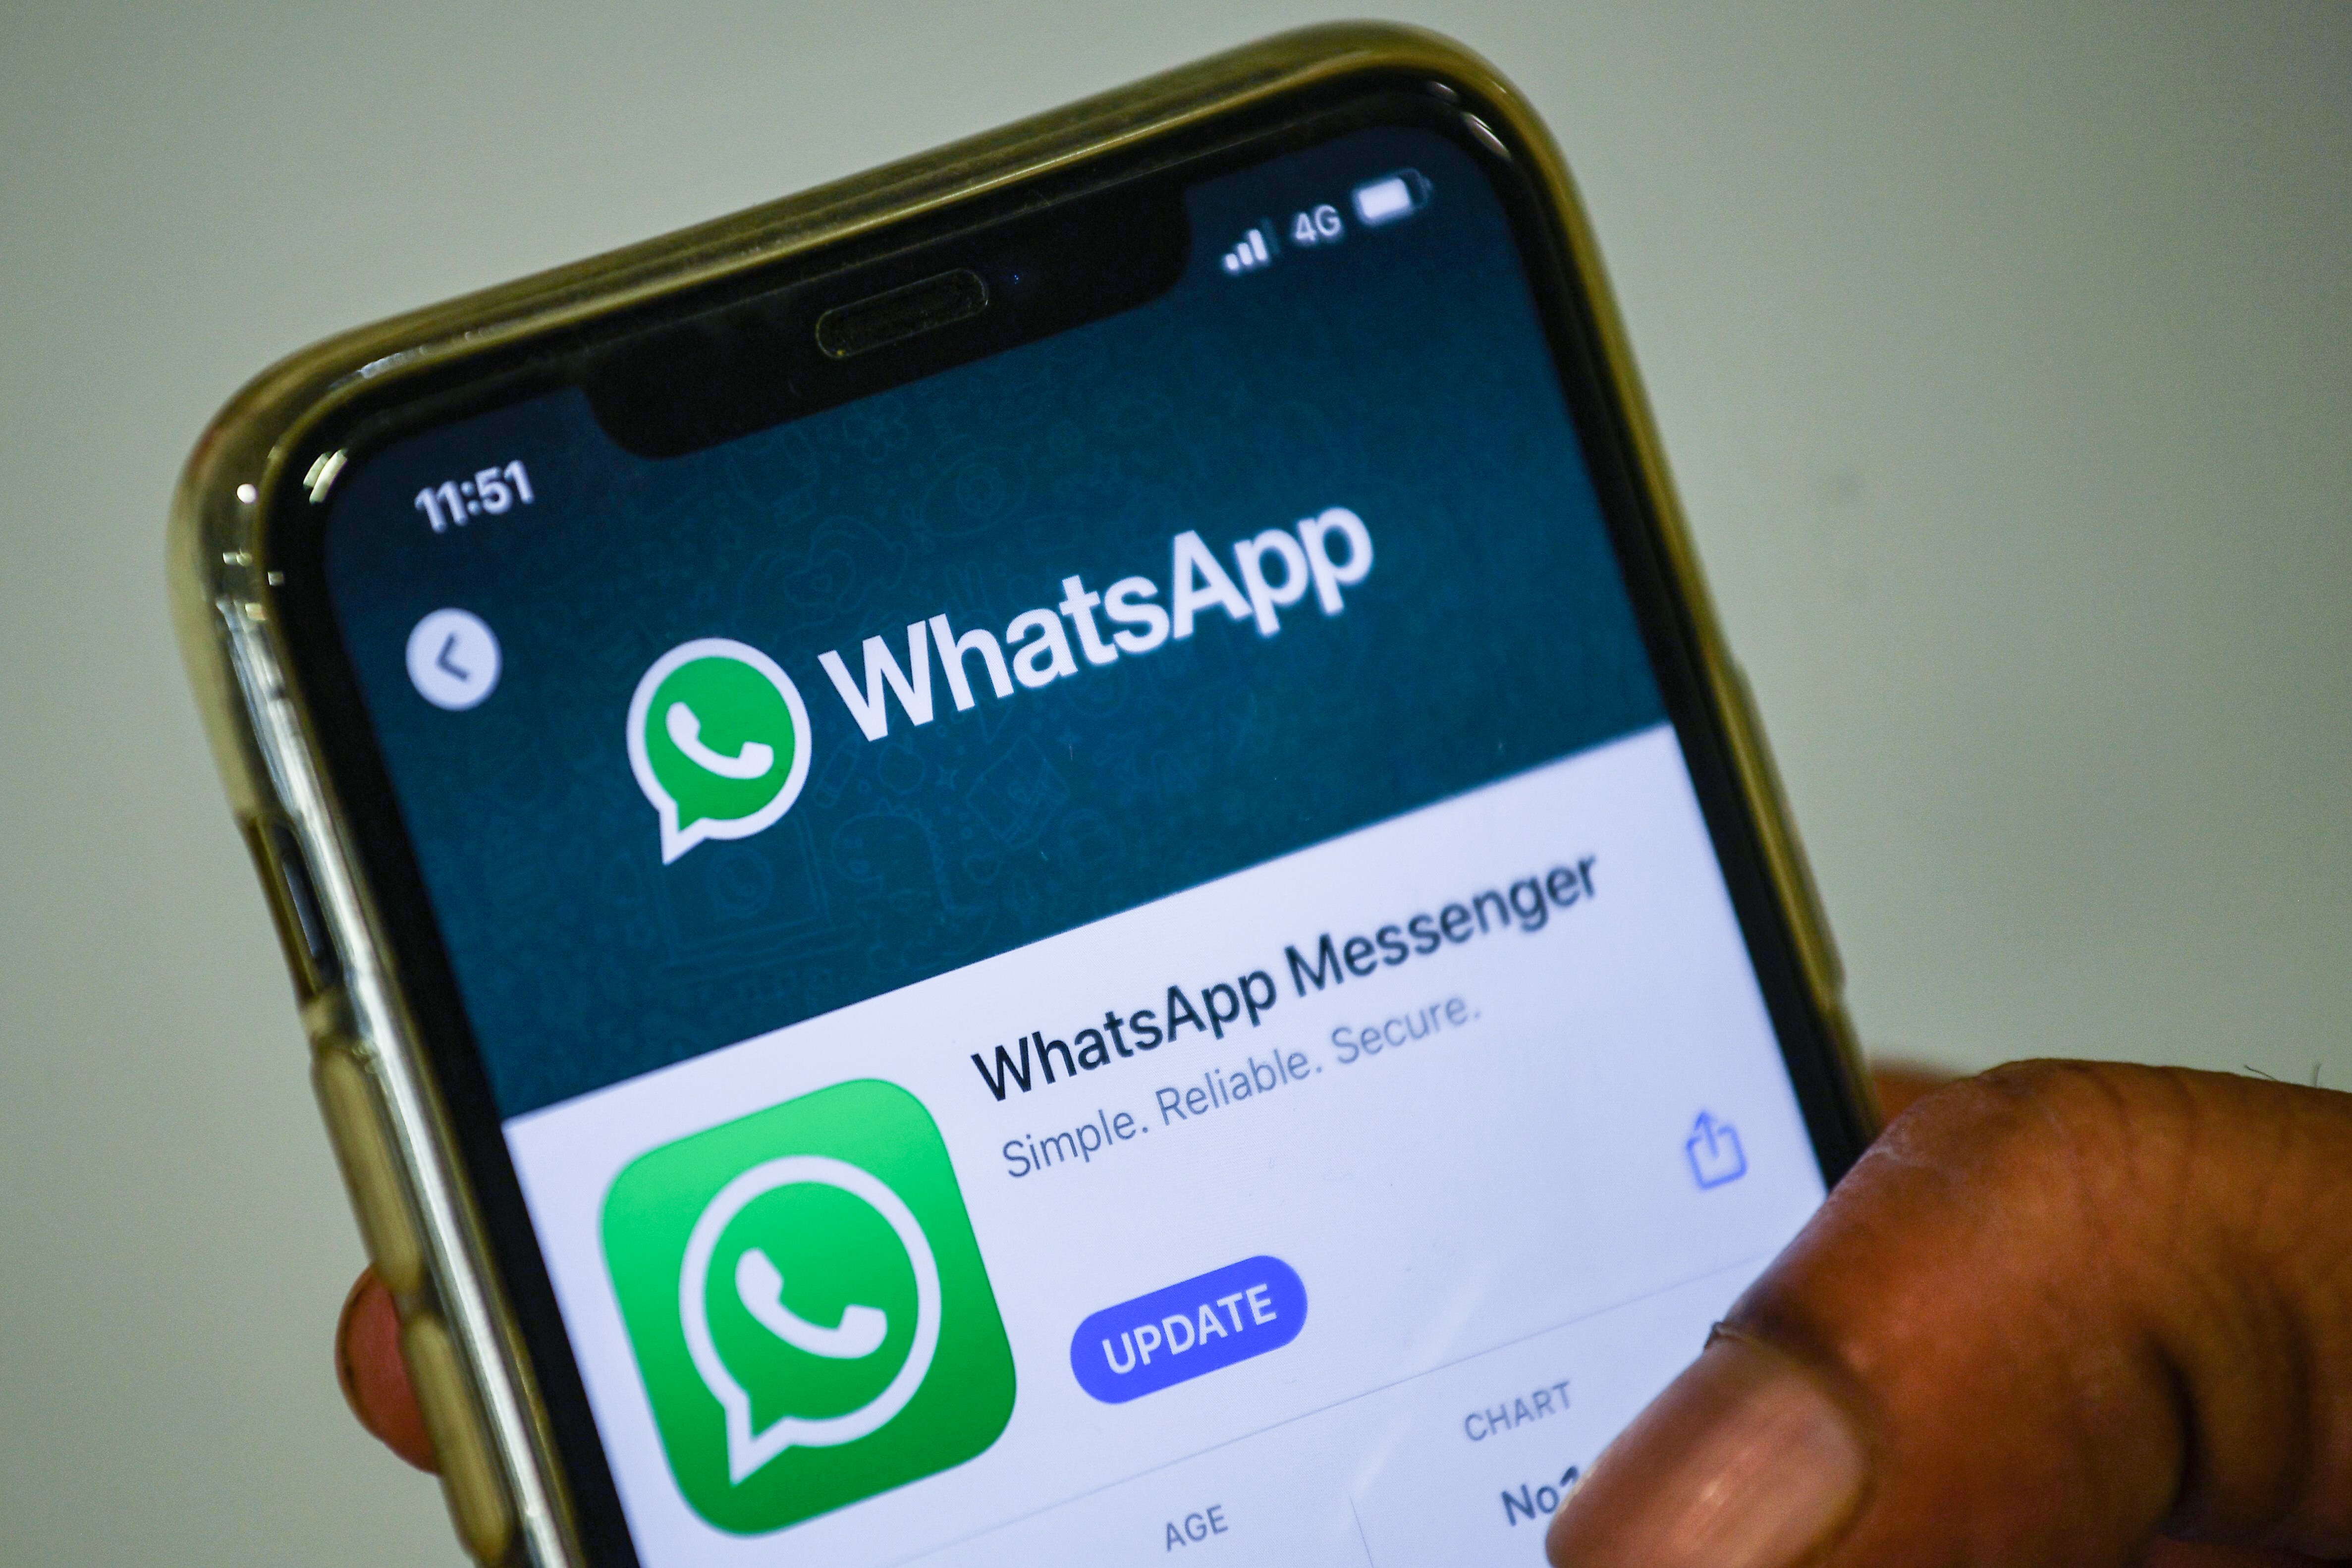 Hong Kong’s privacy watchdog has renewed calls for greater clarity over new data-sharing arrangements between WhatsApp and its parent company, Facebook. Photo: AFP